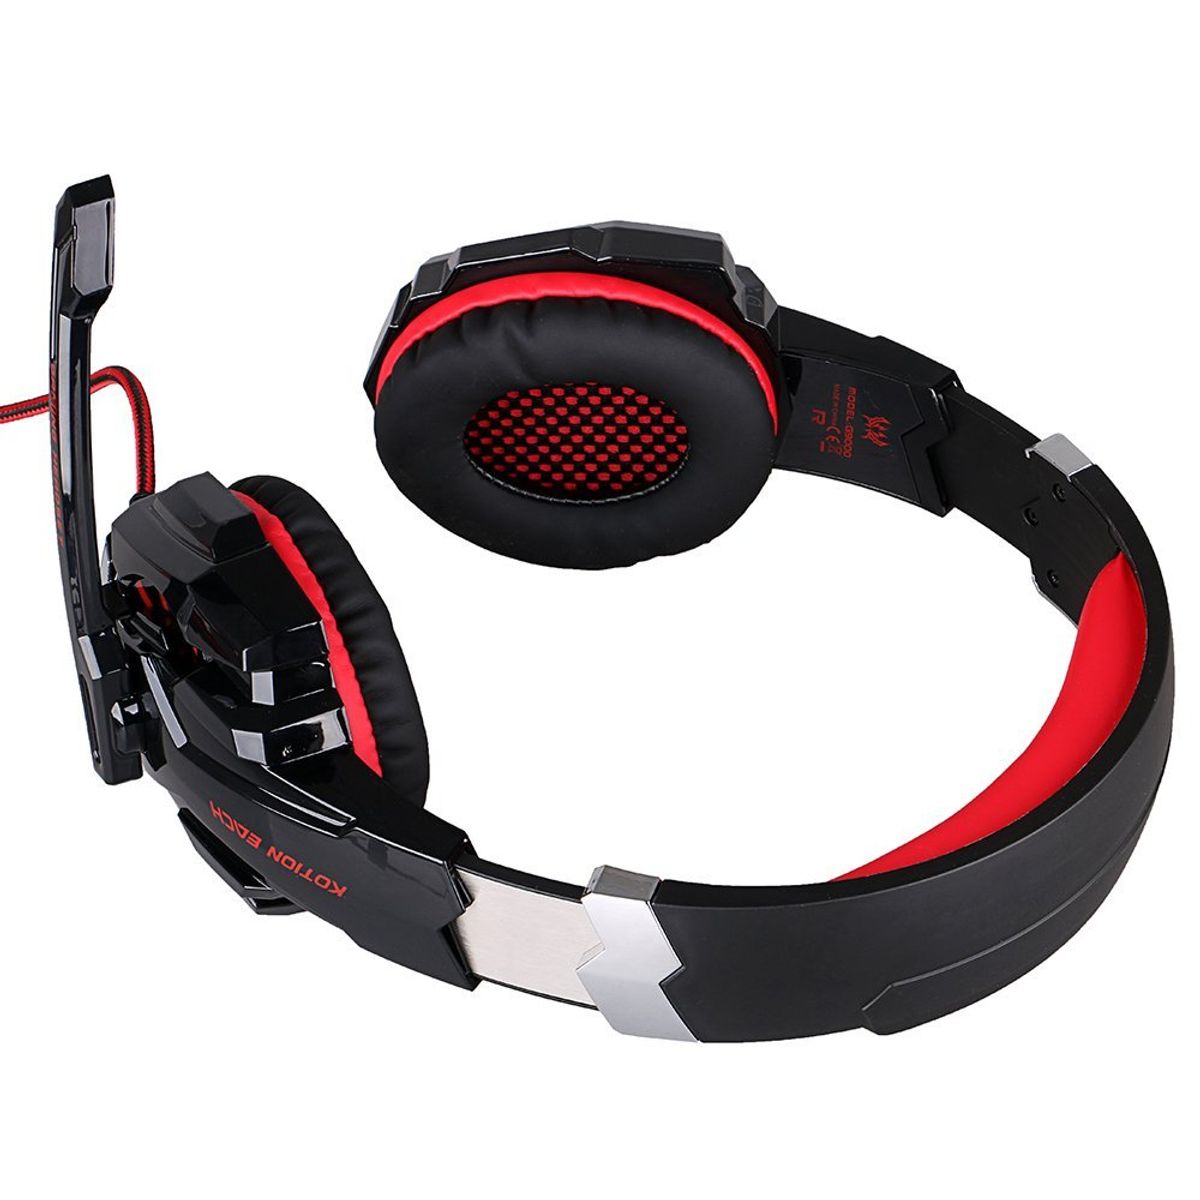 kotion each g9000 gaming headset black & red review